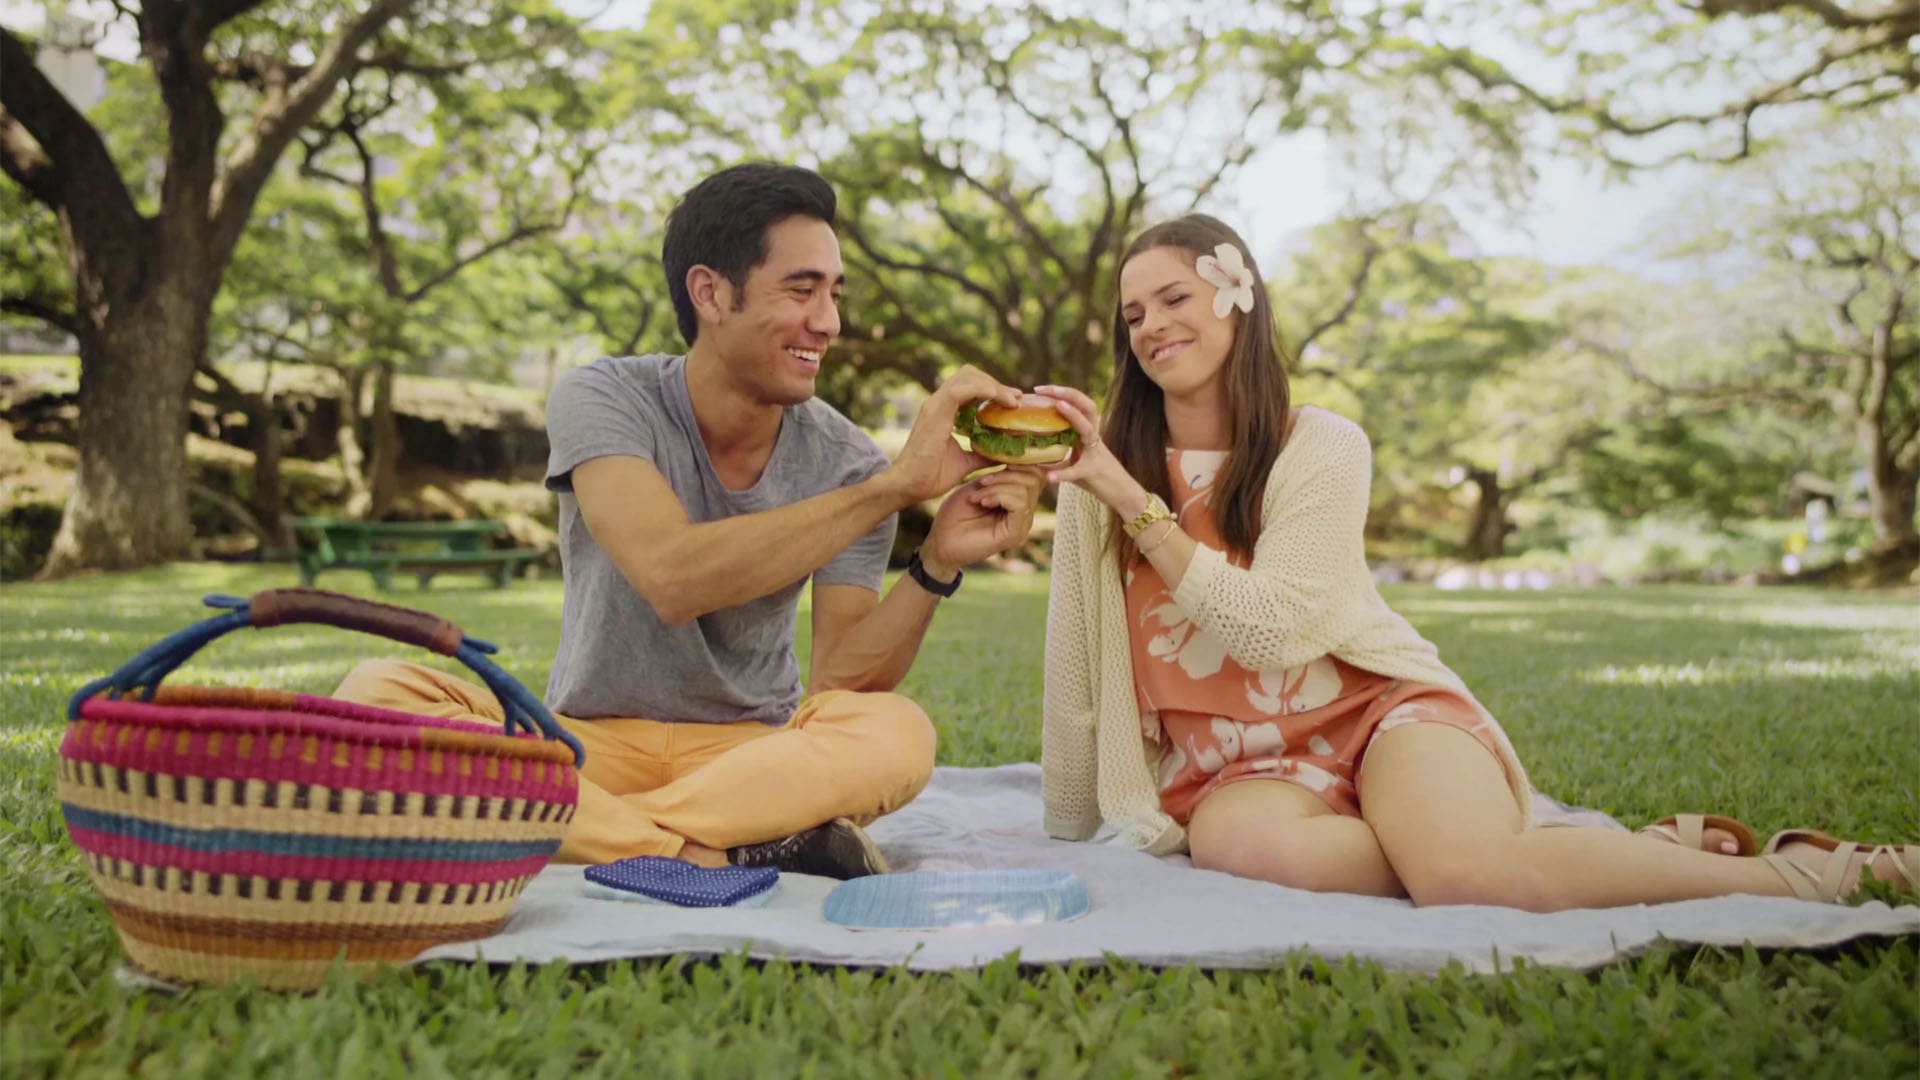 McDonald's of Hawaii: Amazing Ingredients Campaign - Have a picnic with Zach King!